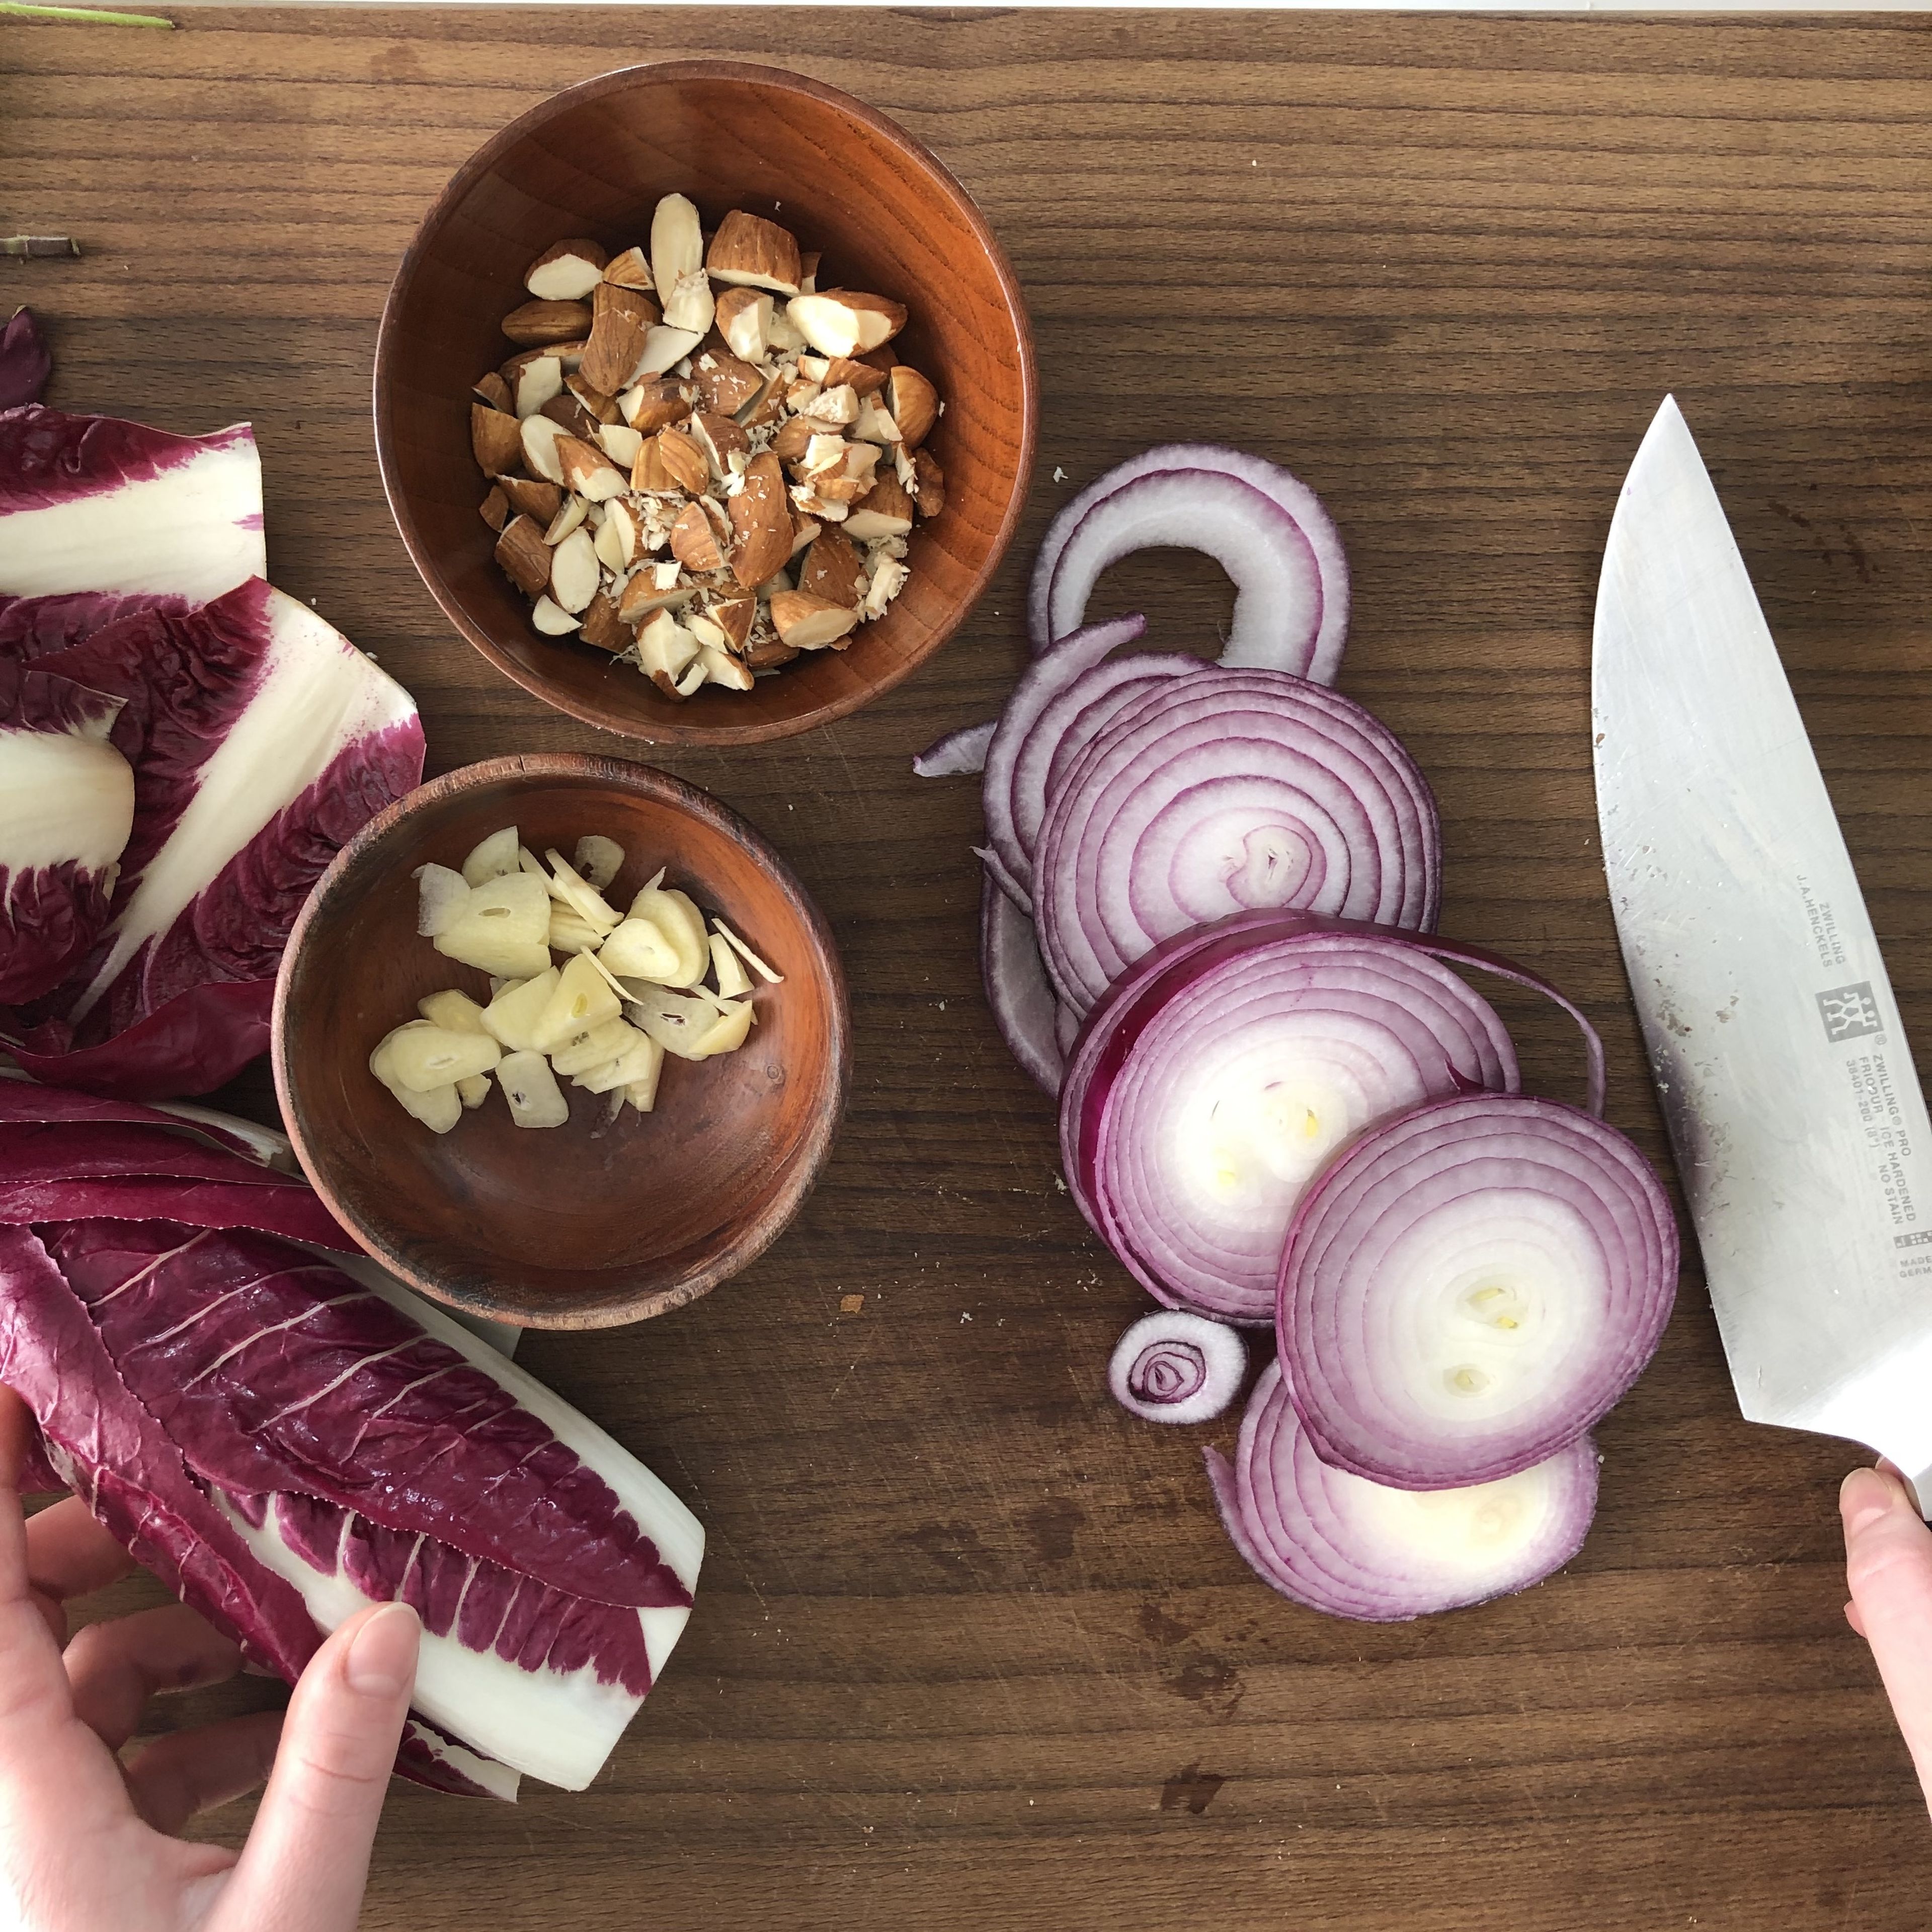 Peel the onion and garlic. Cut the onion in rings and the garlic in fine slices. Coarsely chop the almonds. Remove the stalk from the radicchio and separate the leaves.